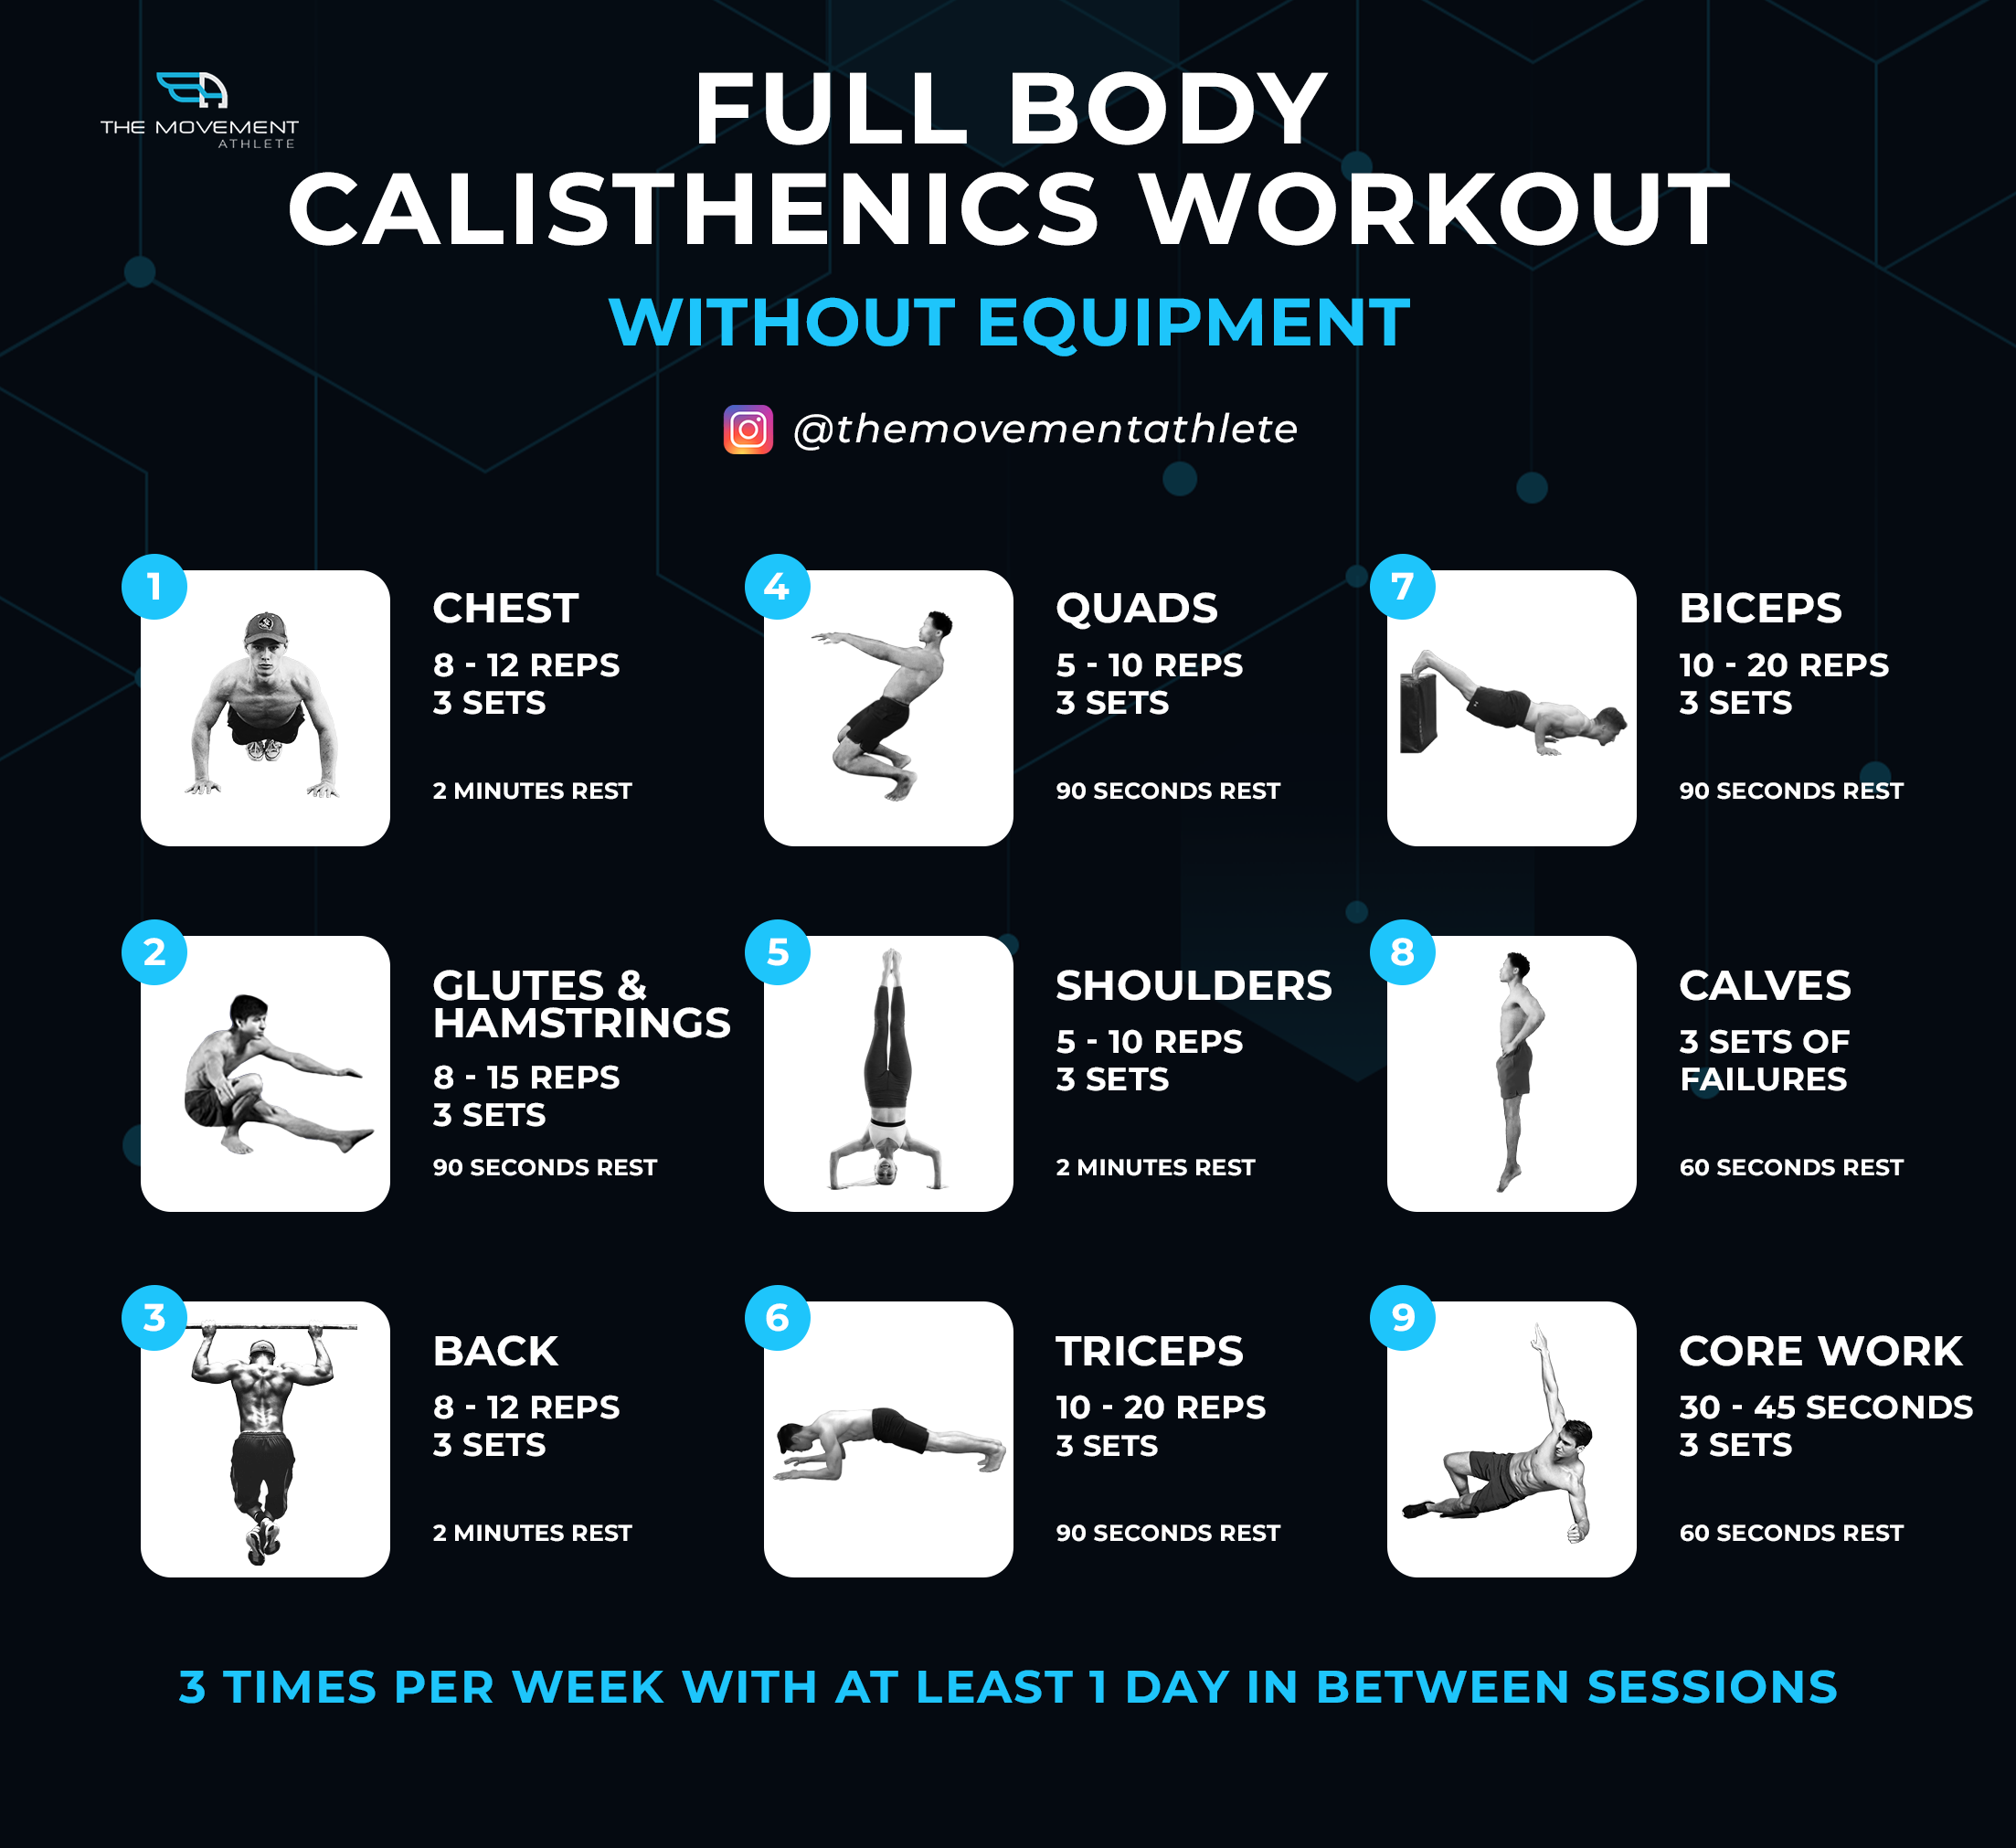 Full Body Calisthenics Workout Without Equipment without Promo